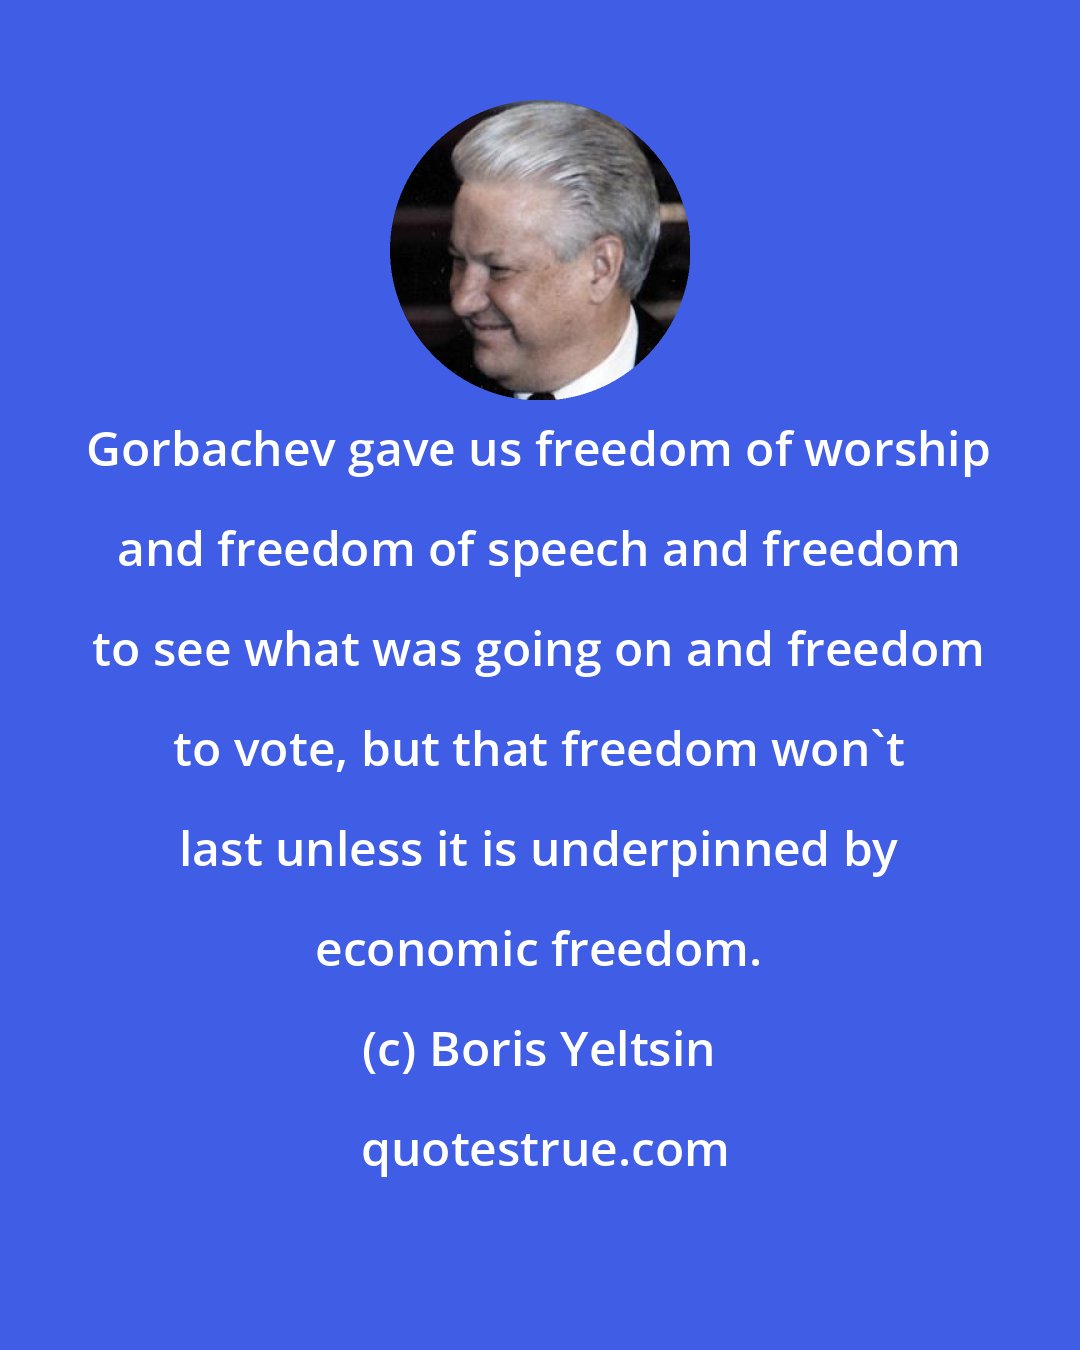 Boris Yeltsin: Gorbachev gave us freedom of worship and freedom of speech and freedom to see what was going on and freedom to vote, but that freedom won't last unless it is underpinned by economic freedom.